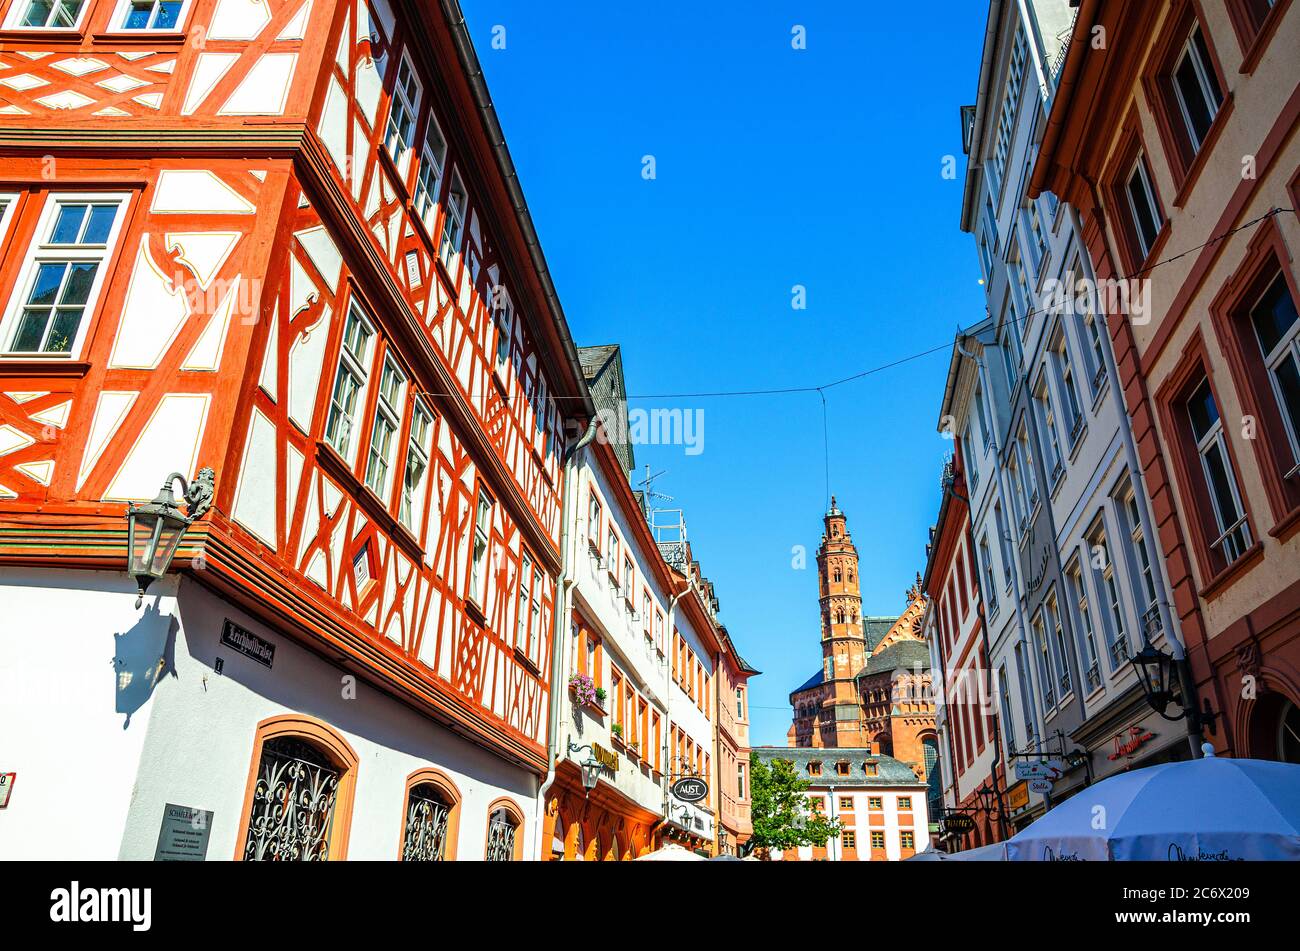 Mainz, Germany, August 24, 2019: Traditional german houses with typical wooden wall fachwerk style and Mainz Cathedral or St. Martin's Cathedral building in historical medieval town centre Stock Photo